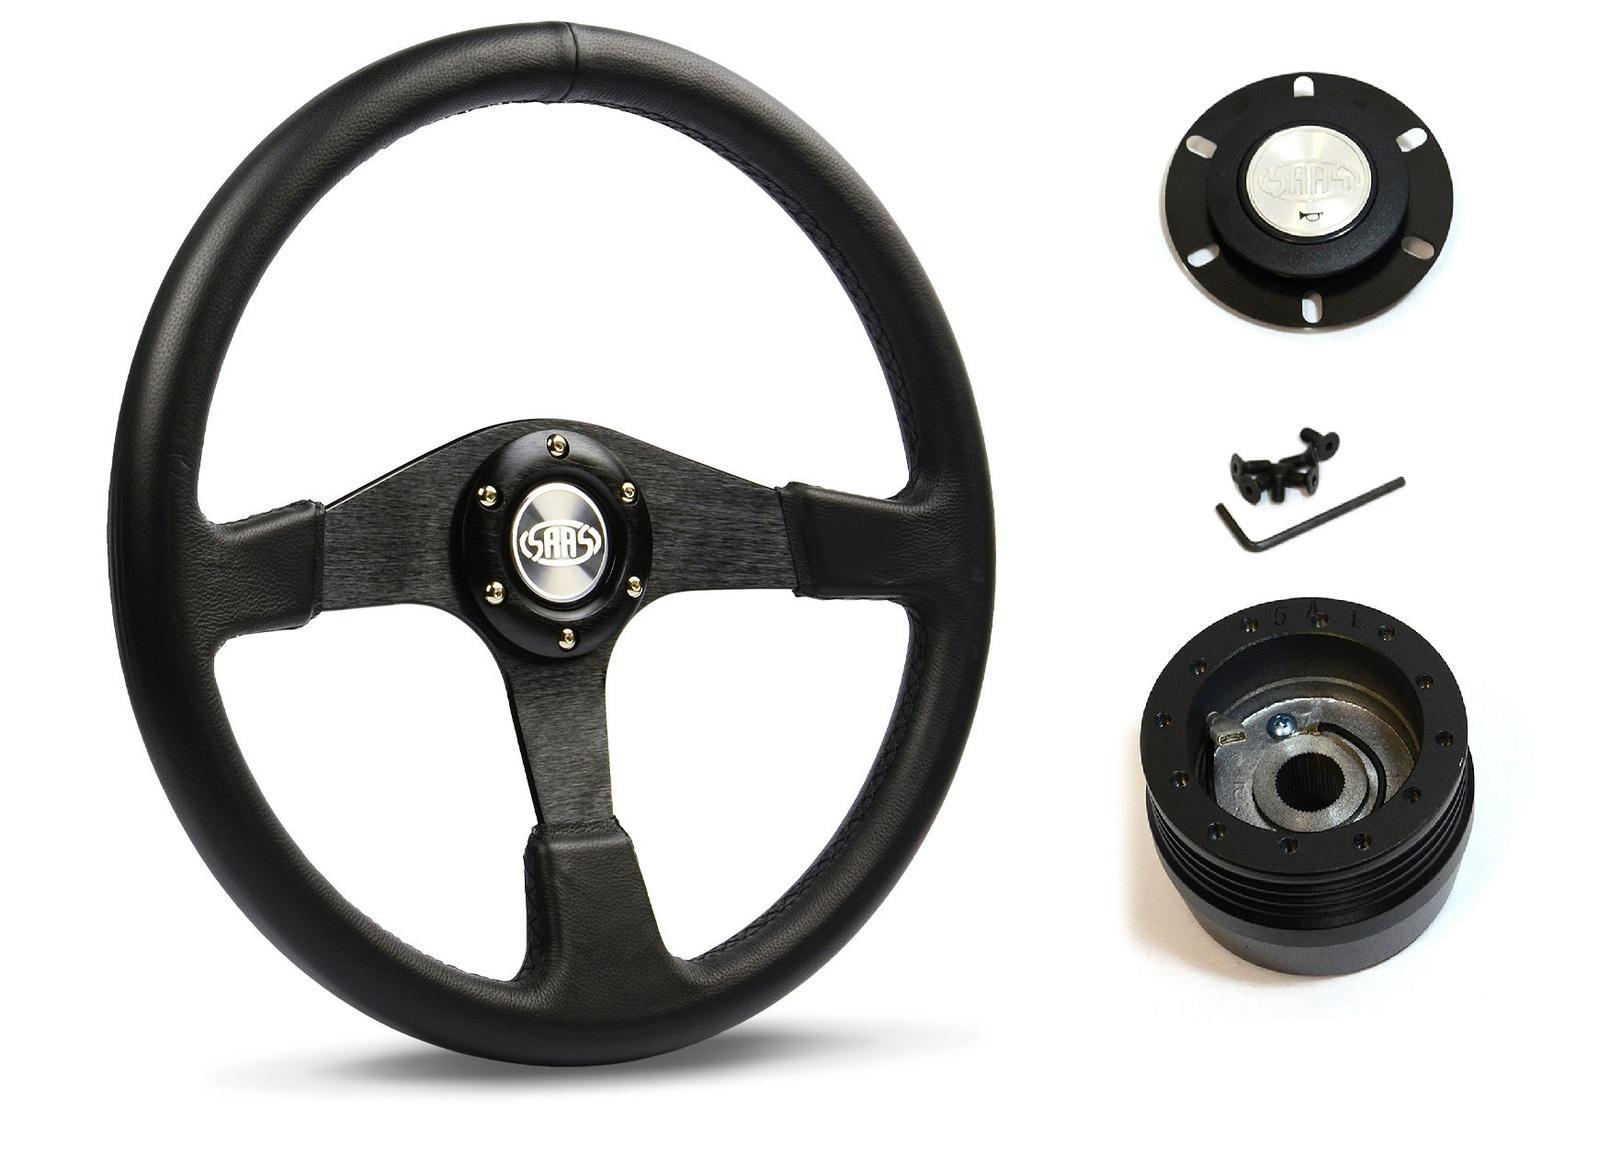 SAAS Steering Wheel Leather 15 " ADR Octane Black Spoke SW515BL-R and SAAS boss kit for Flaming River GM Style Aftermarket Steering Columns 0